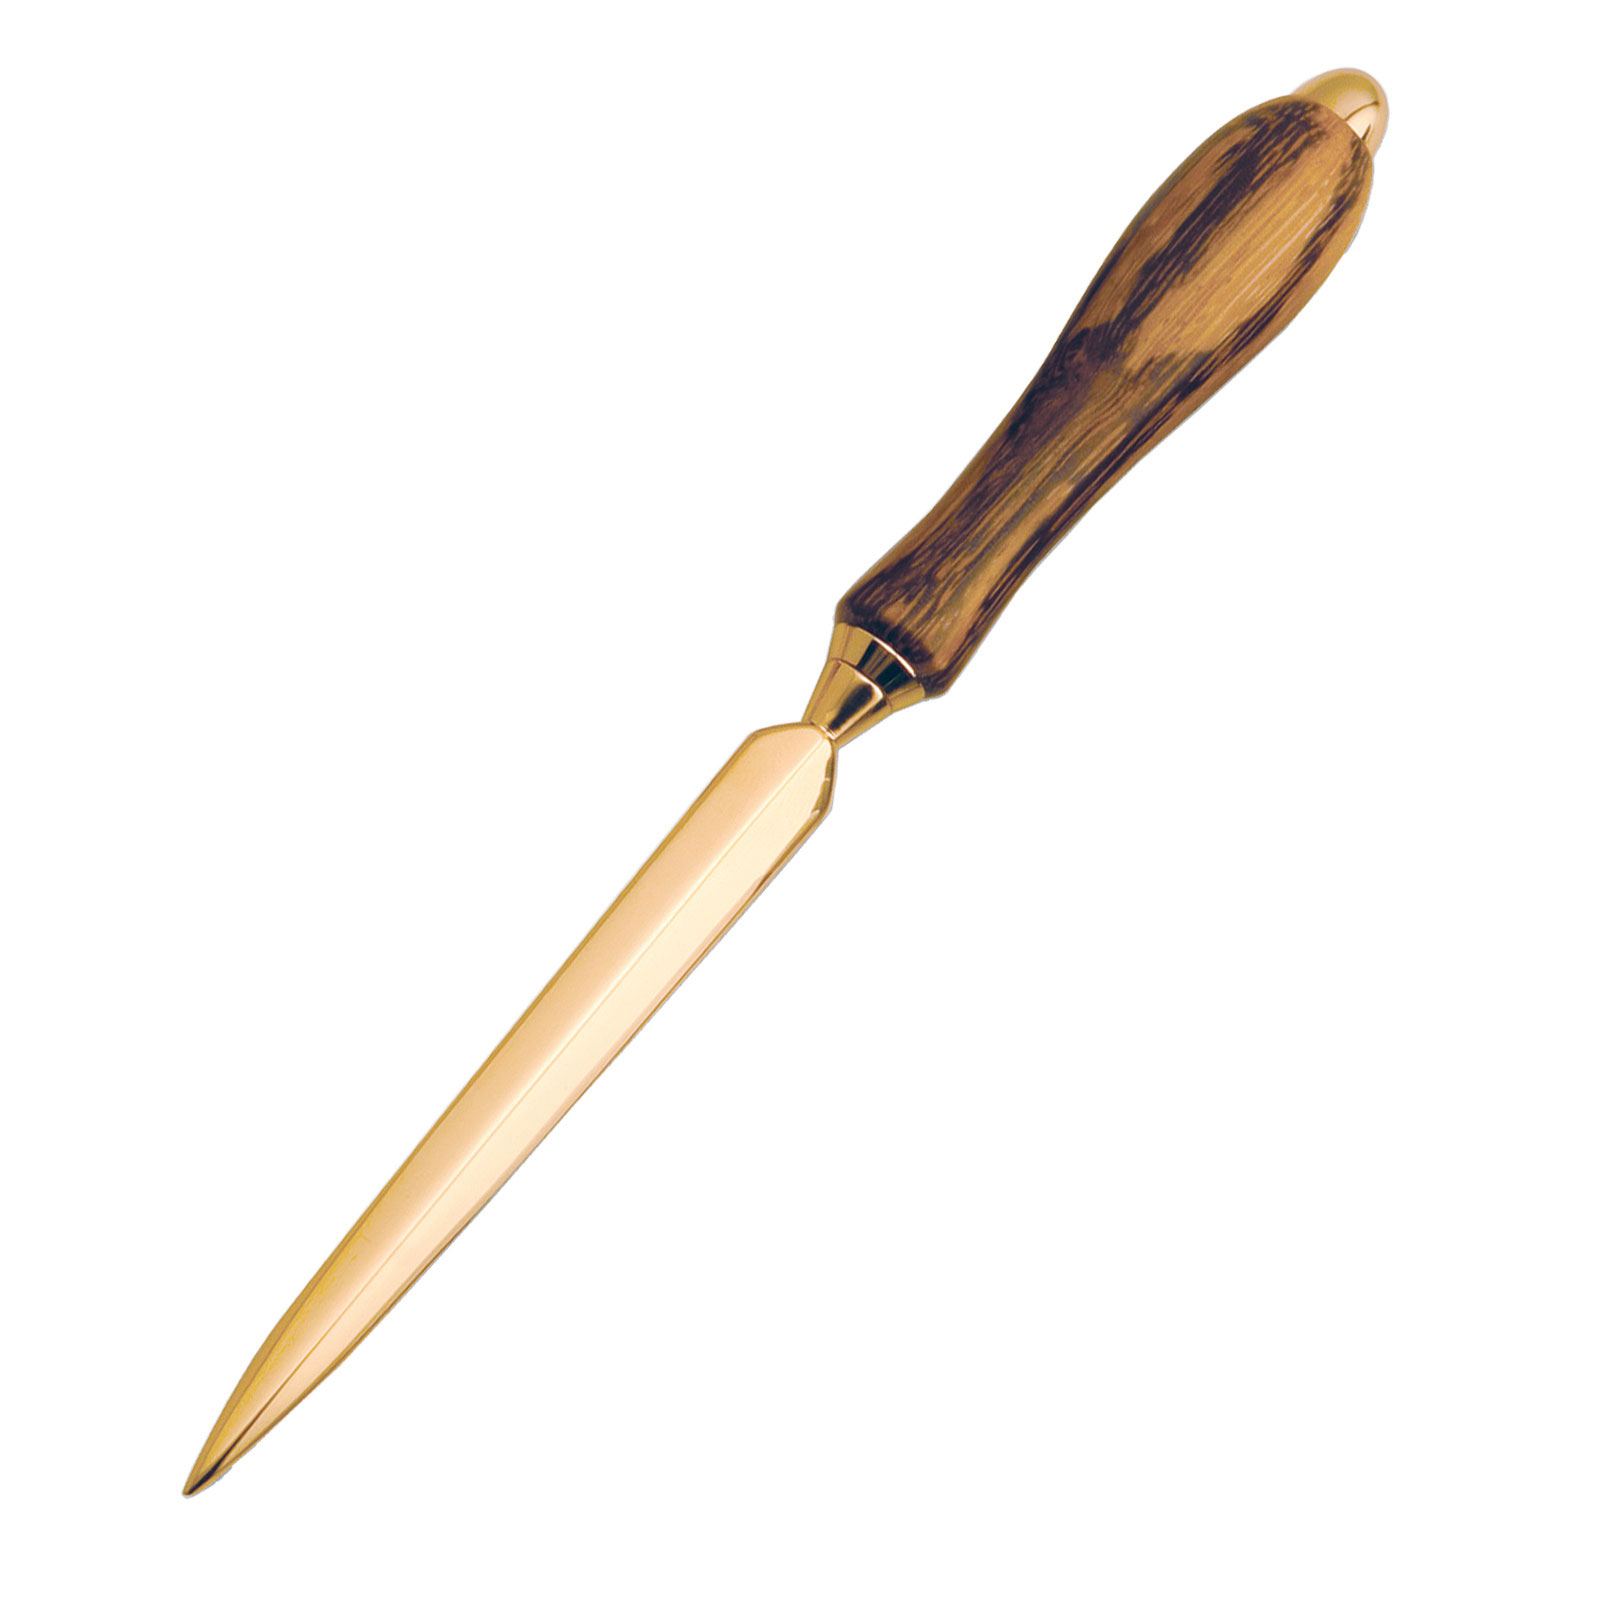 A complete guide to the letter opener - The Pen Company Blog